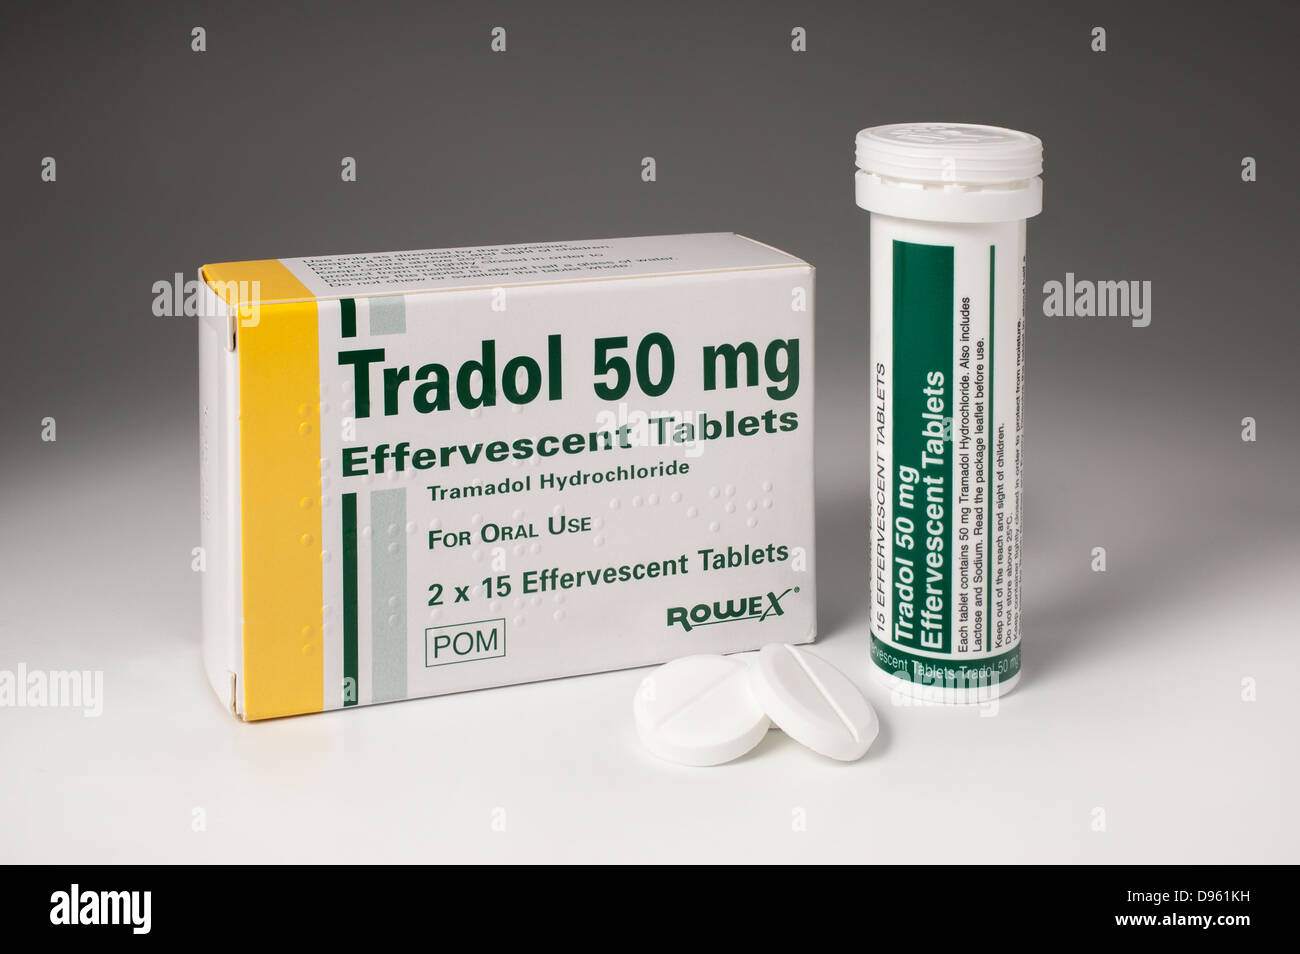 is tramadol safe for kids